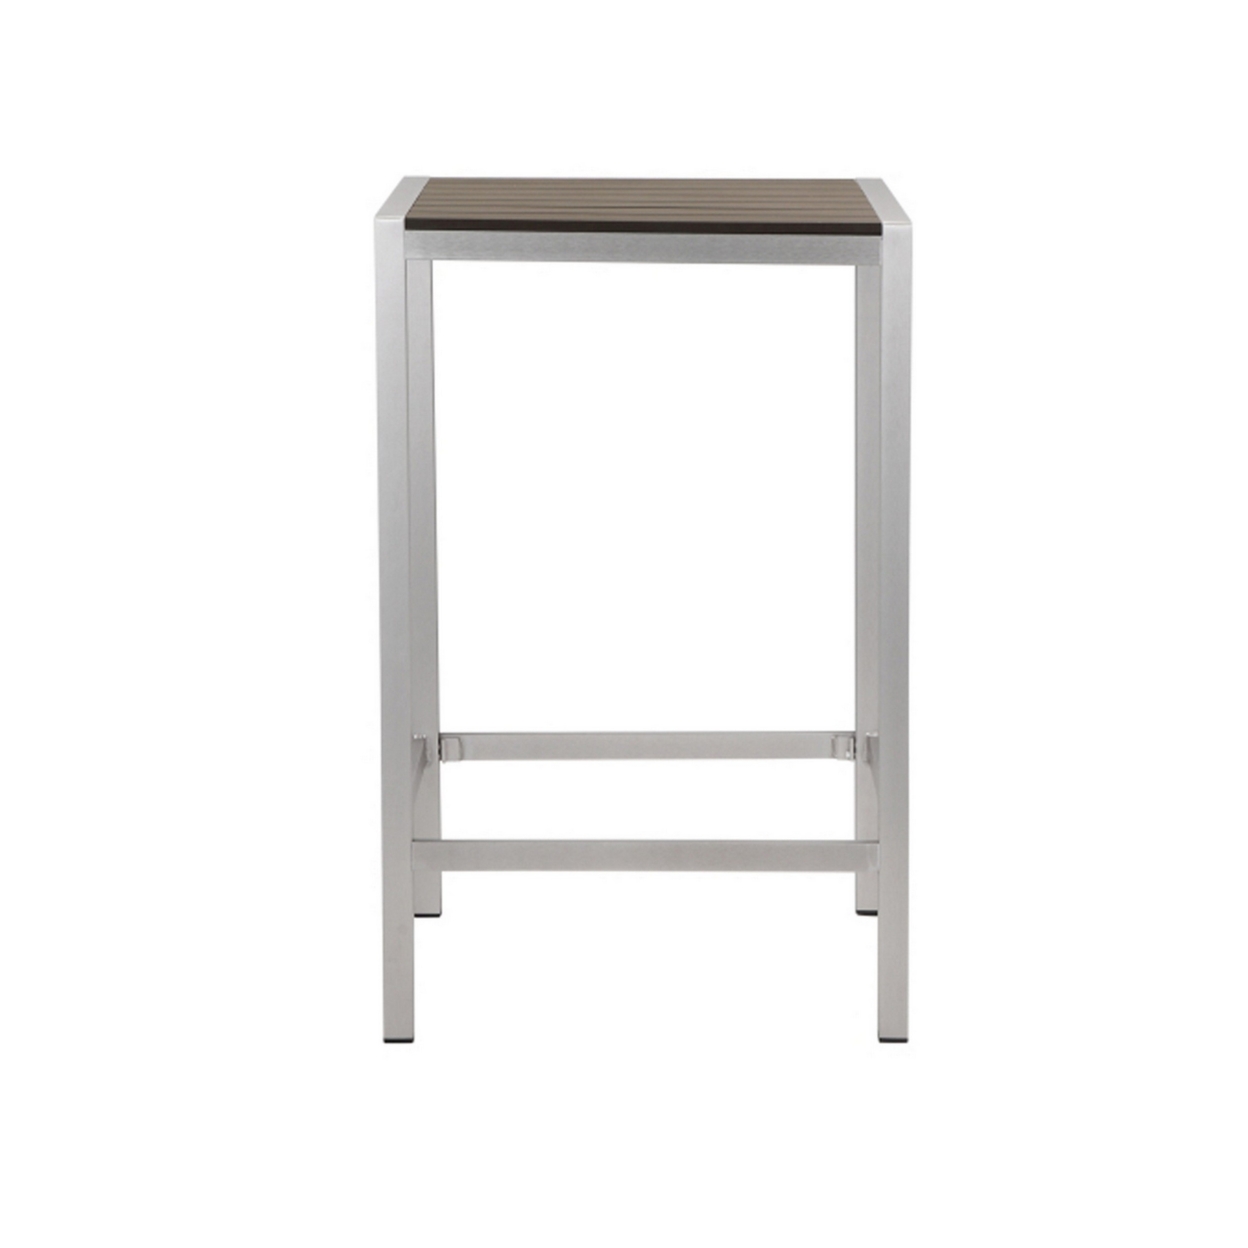 Kylo 43 Inch Outdoor Bar Table, White And Brown Aluminum Frame, Small- Saltoro Sherpi